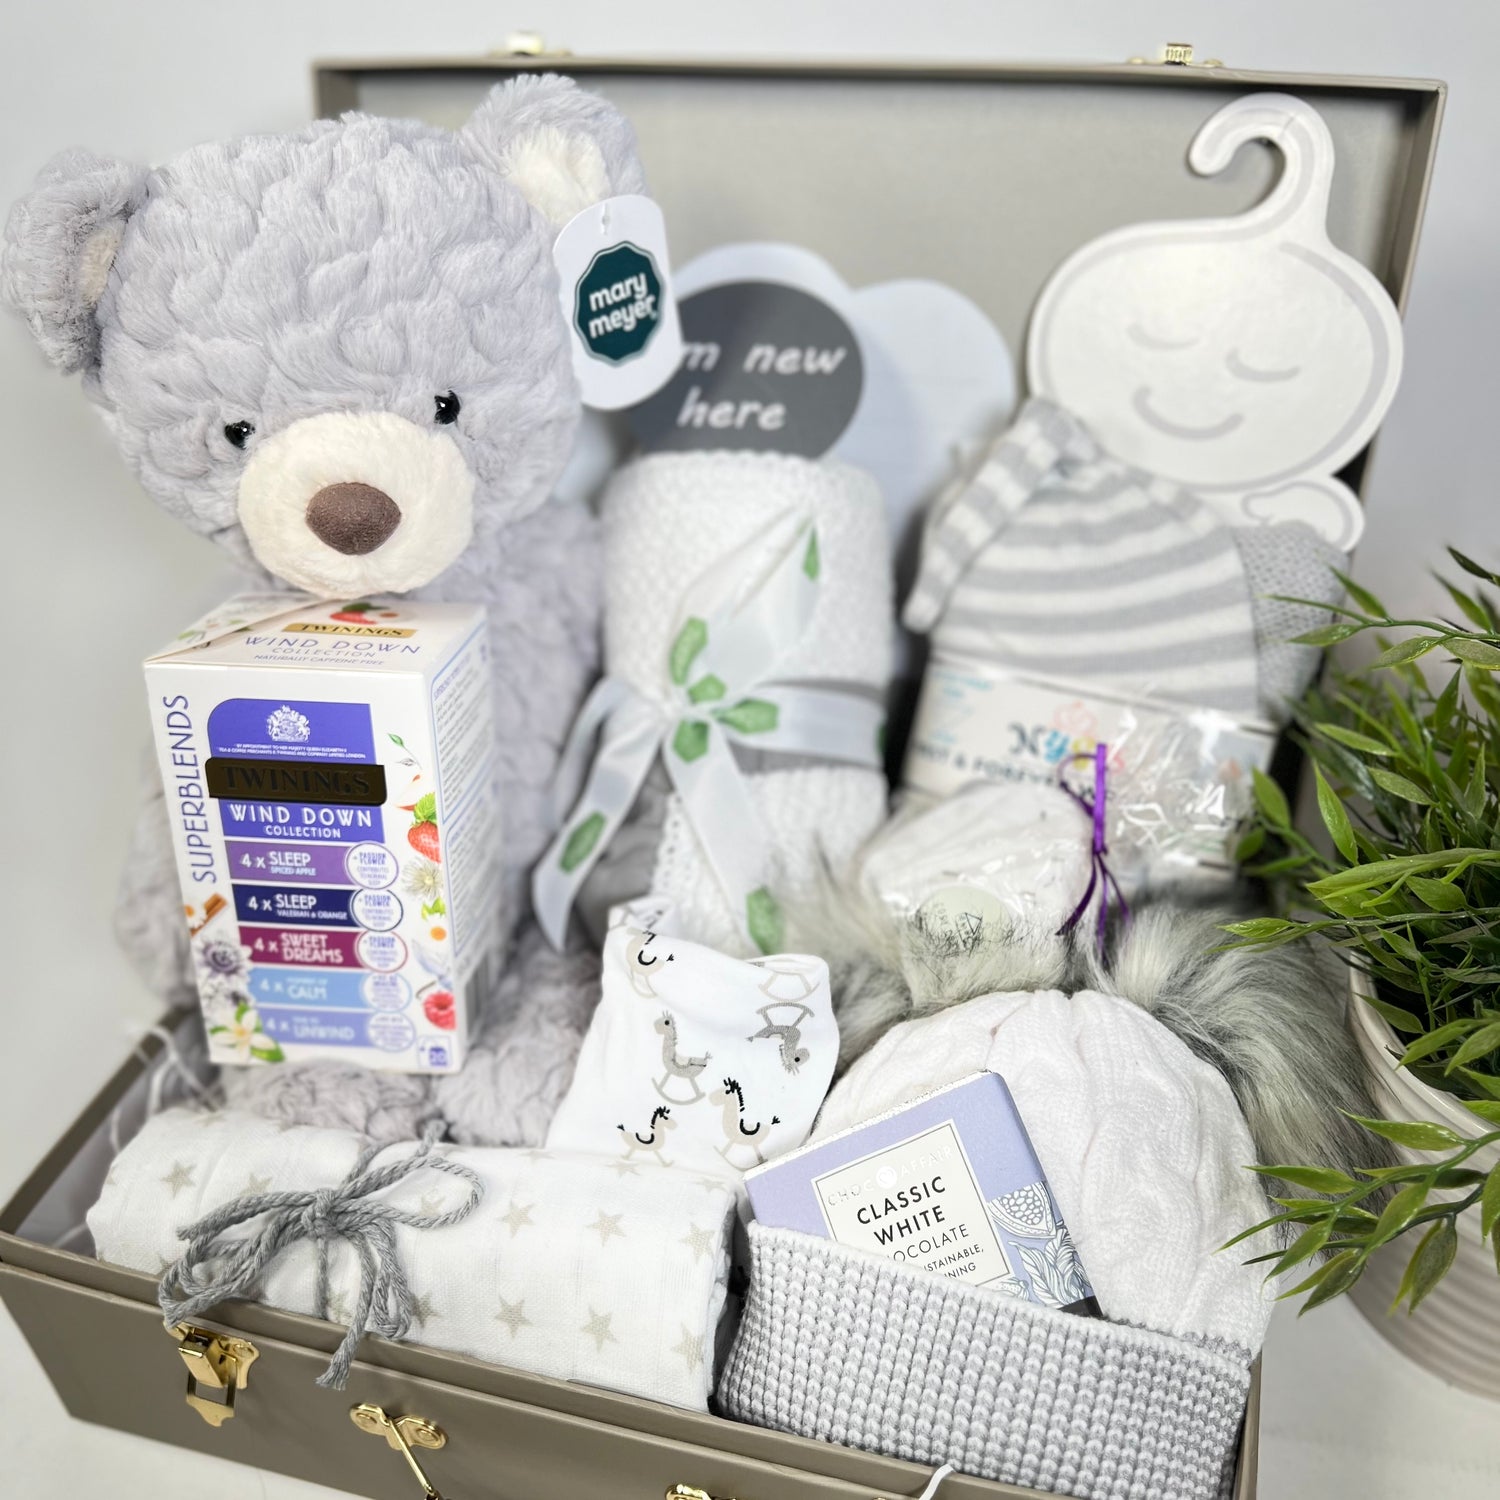  A neutral new baby gift in a khaki baby keepsake case containing 1 medium Mary Meyer shadow teddybear soft toy, a white cotton cellular baby blanket with a grey trim, 1 grey swaddle blanket and matching baby knot hat,a large musling, a cotton dribble bib, a grey and white baby pompom hat, a natural lavender bather bomb, a packet of Twining calming and sleep teabags and a bar of Choc Affair white chocolate.